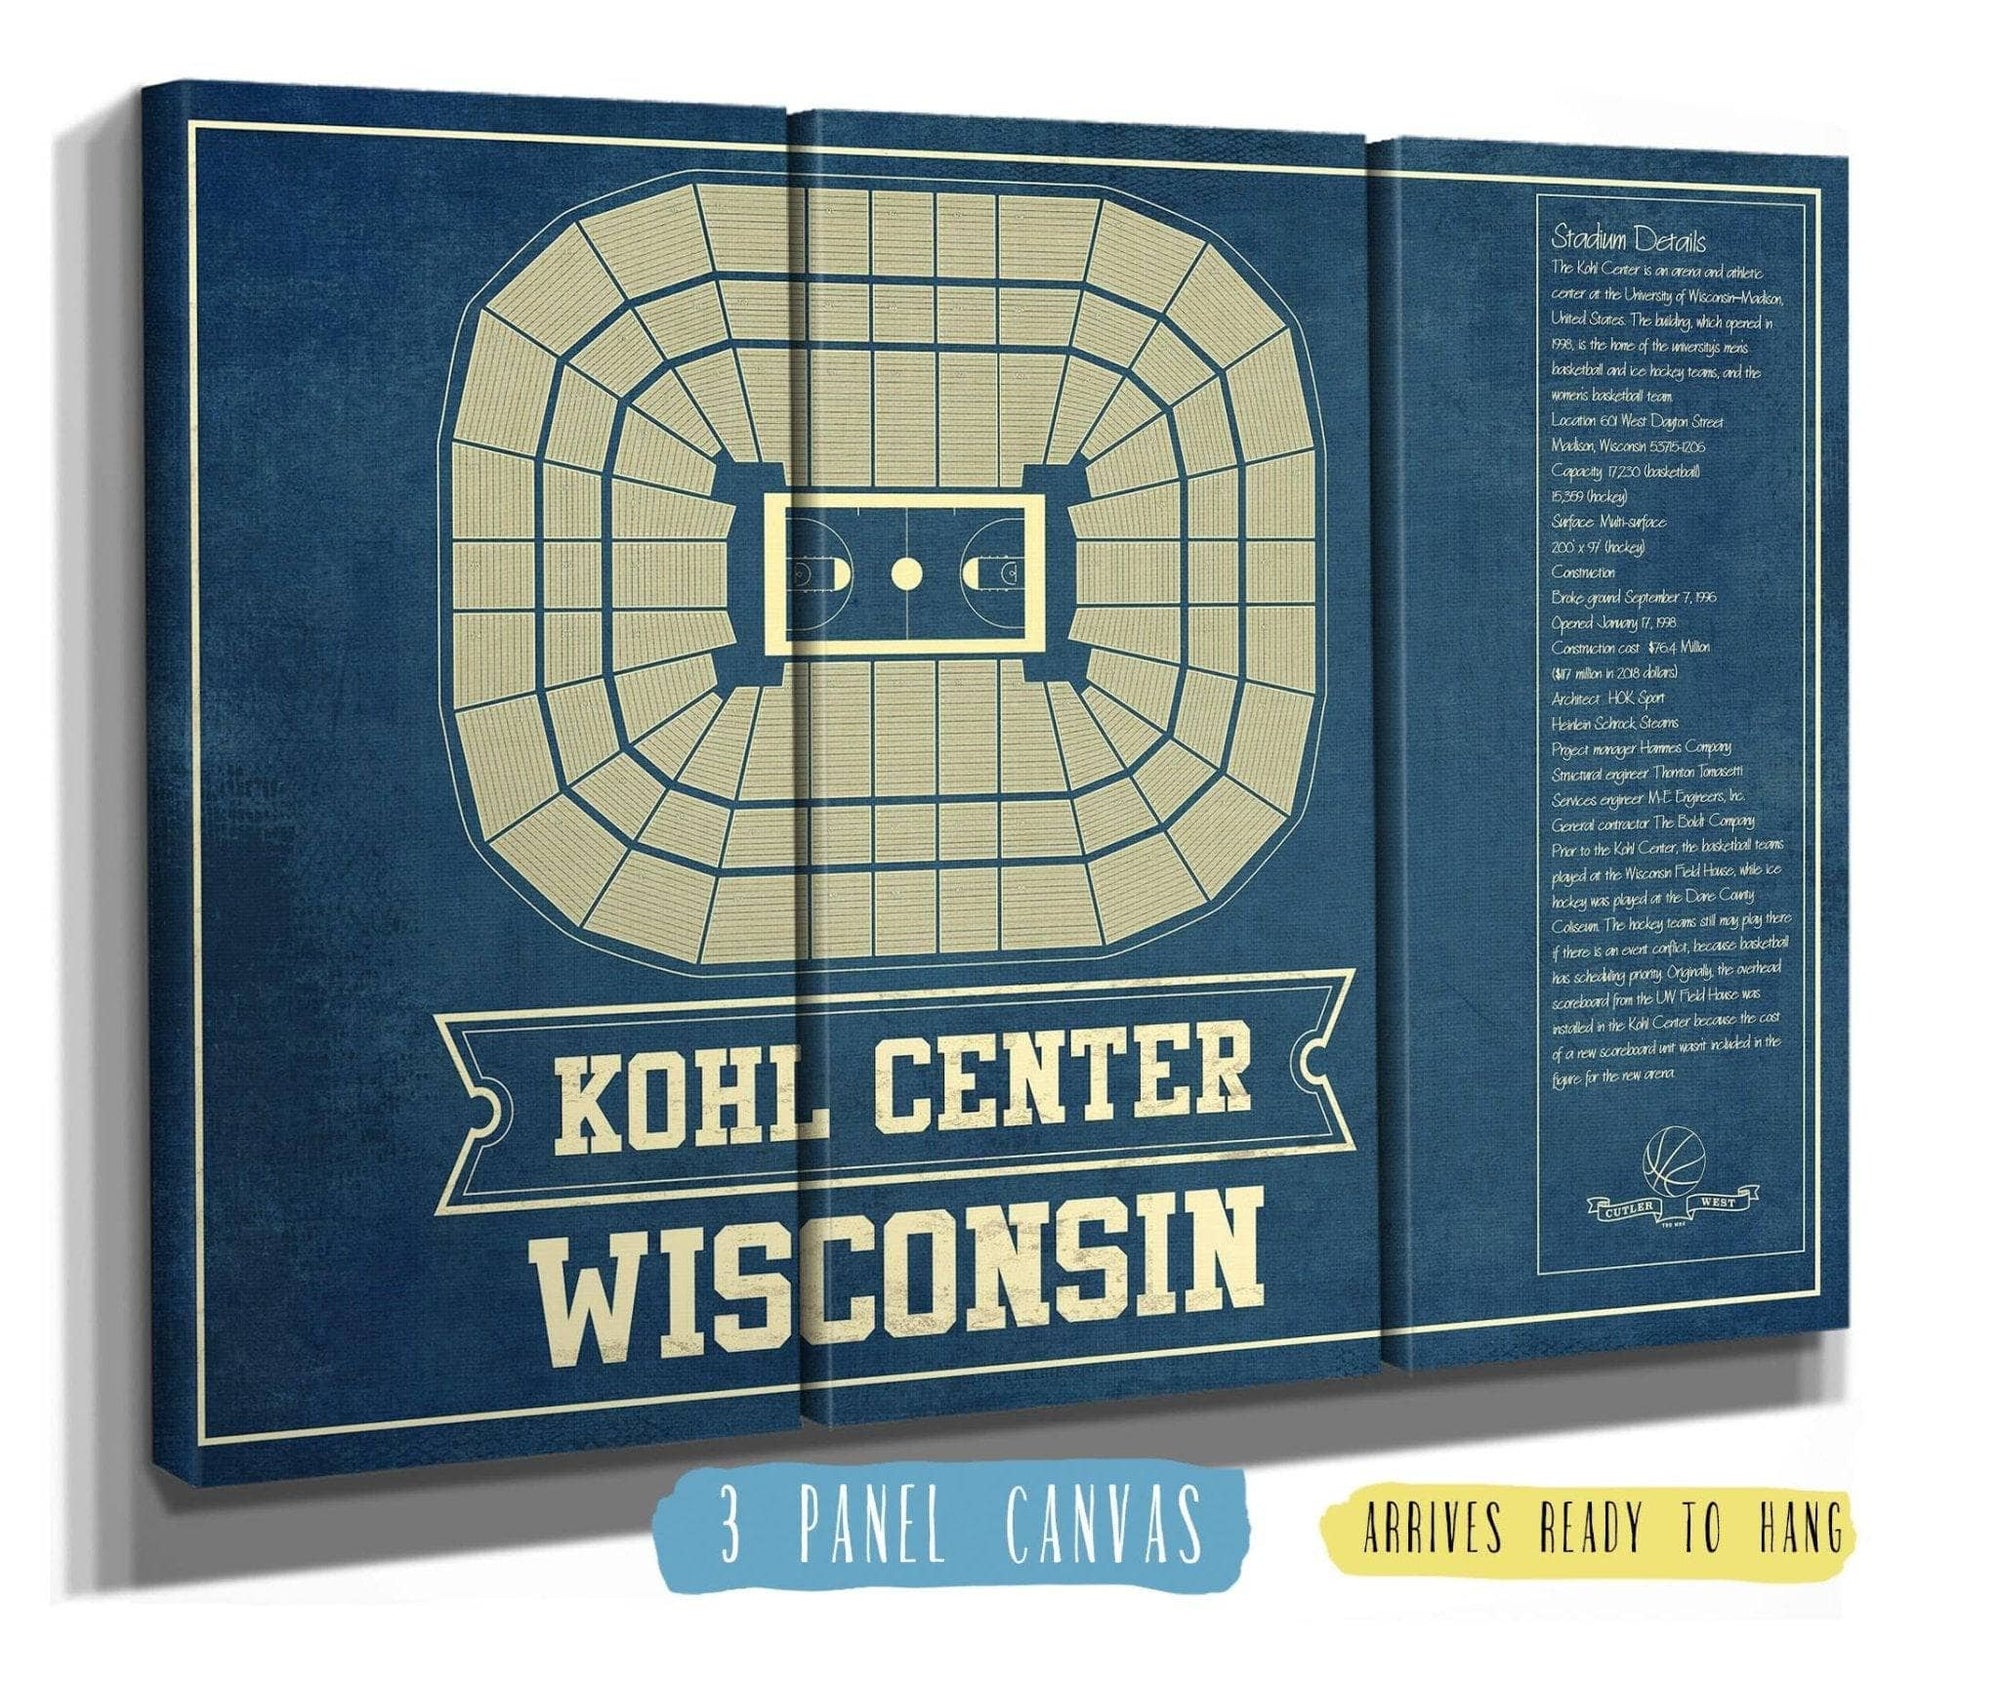 Cutler West 48" x 32" / 3 Panel Canvas Wrap Wisconsin Badgers Wisconsin Kohl Center Seating Chart Vintage Art Print 93335020985258